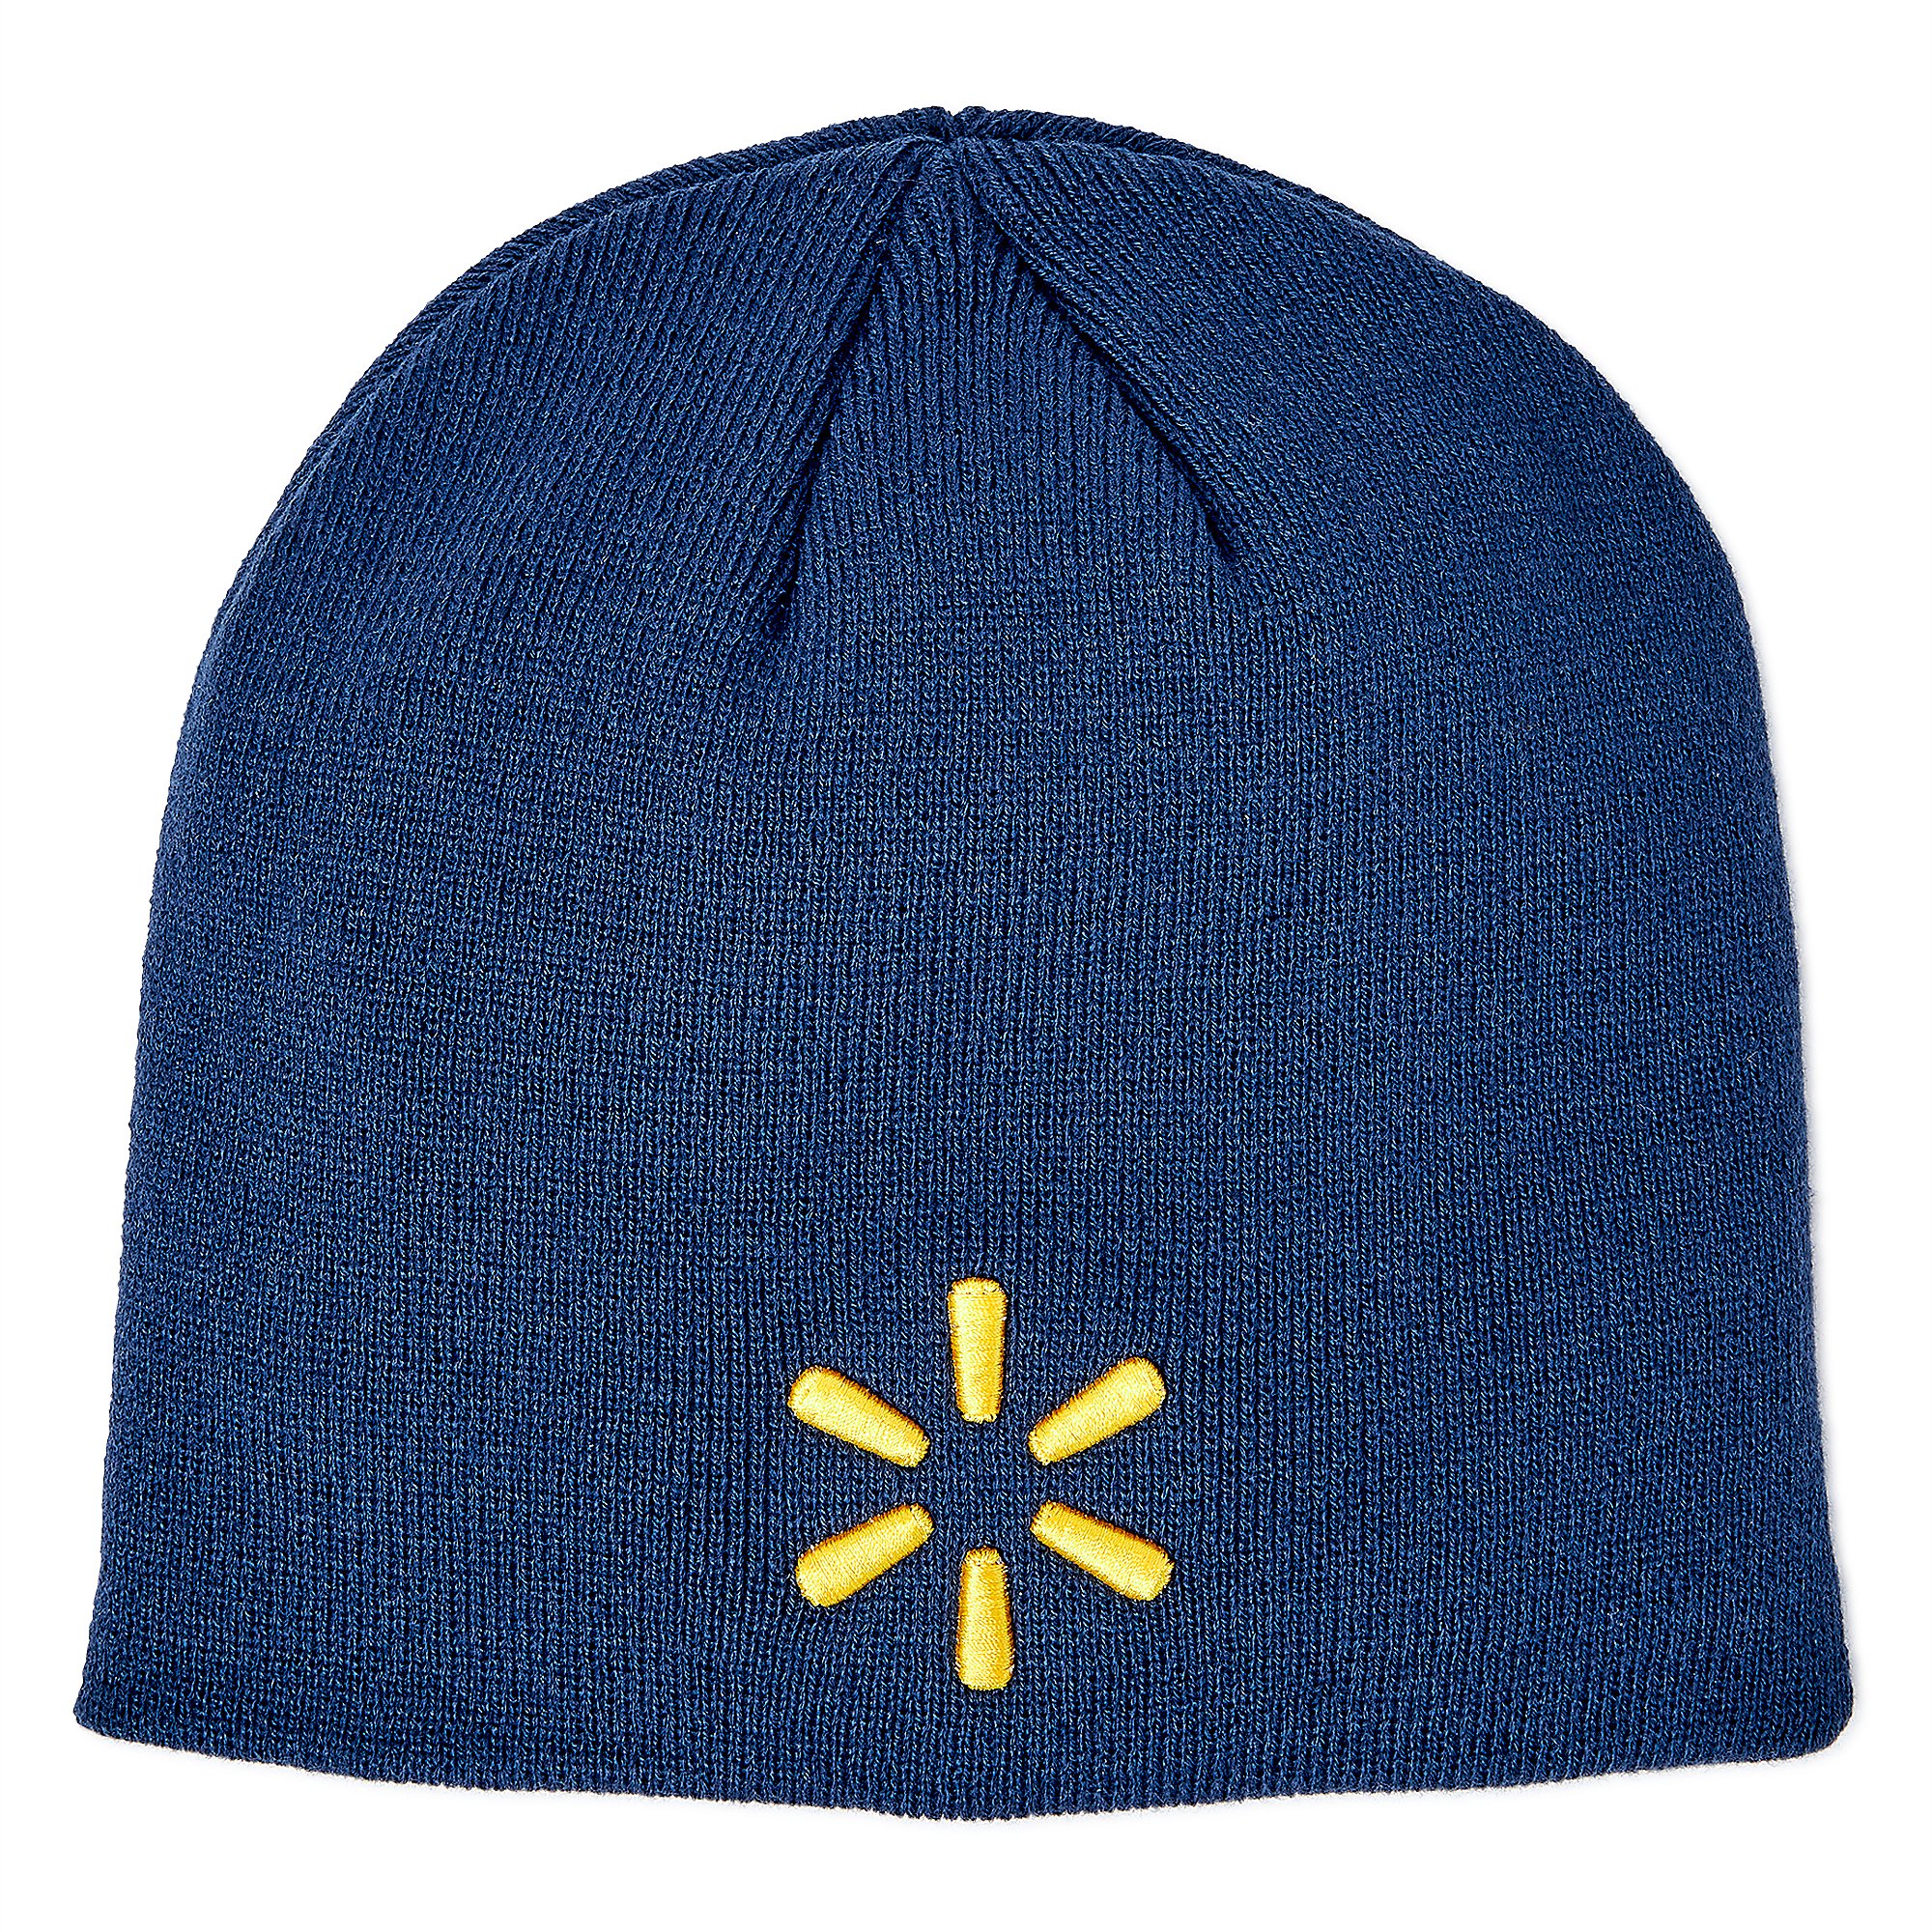 SparkShop Beanie with Yellow Embroidered Spark - Navy | SparkShop